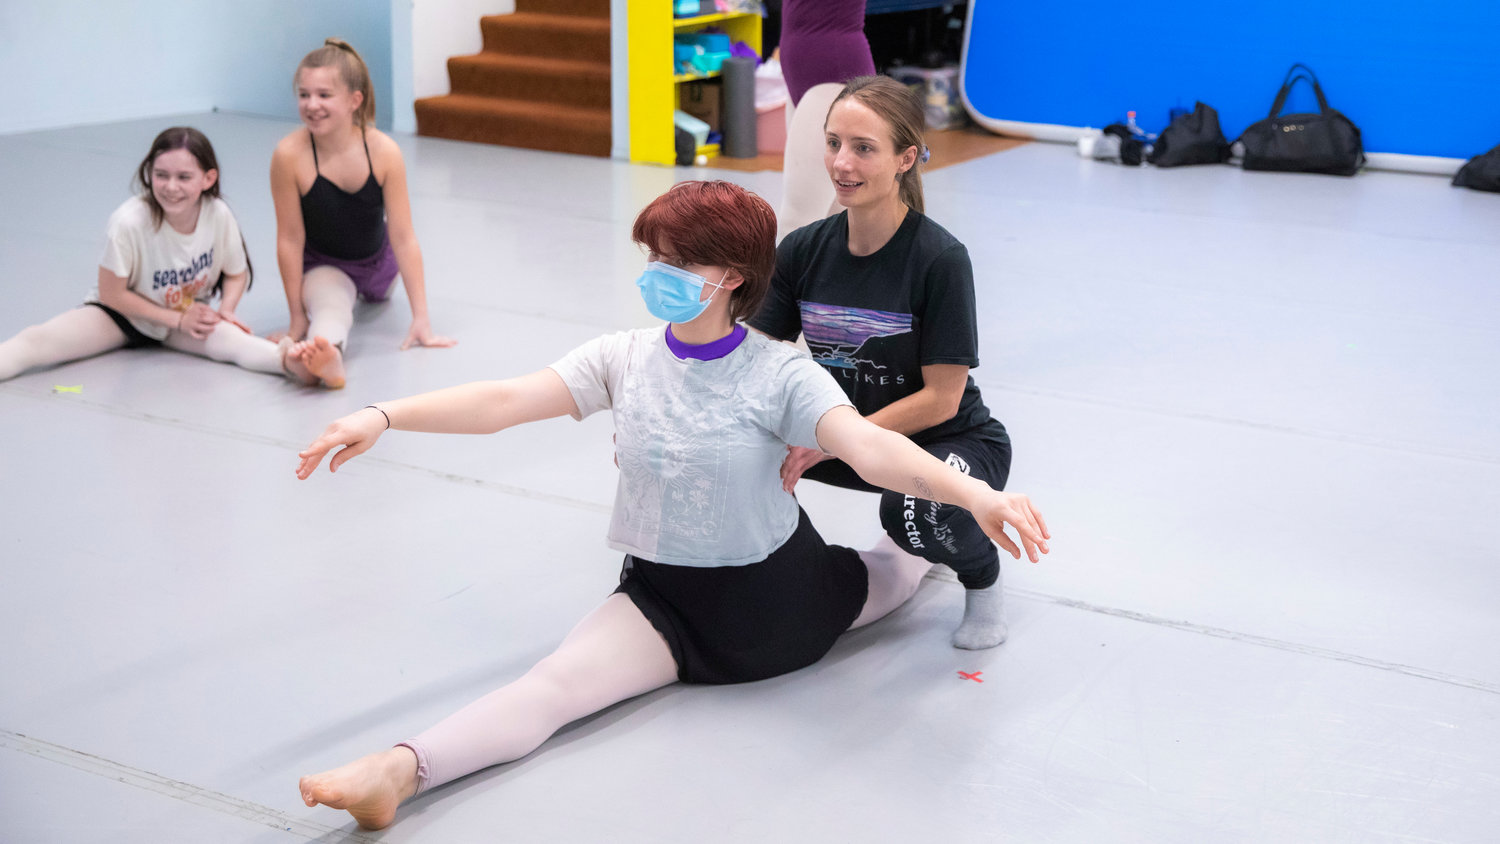 Briana Jones, an instructor at the Southwest Washington Dance Center in Chehalis, works on form with students for upcoming performances during a class on Thursday.